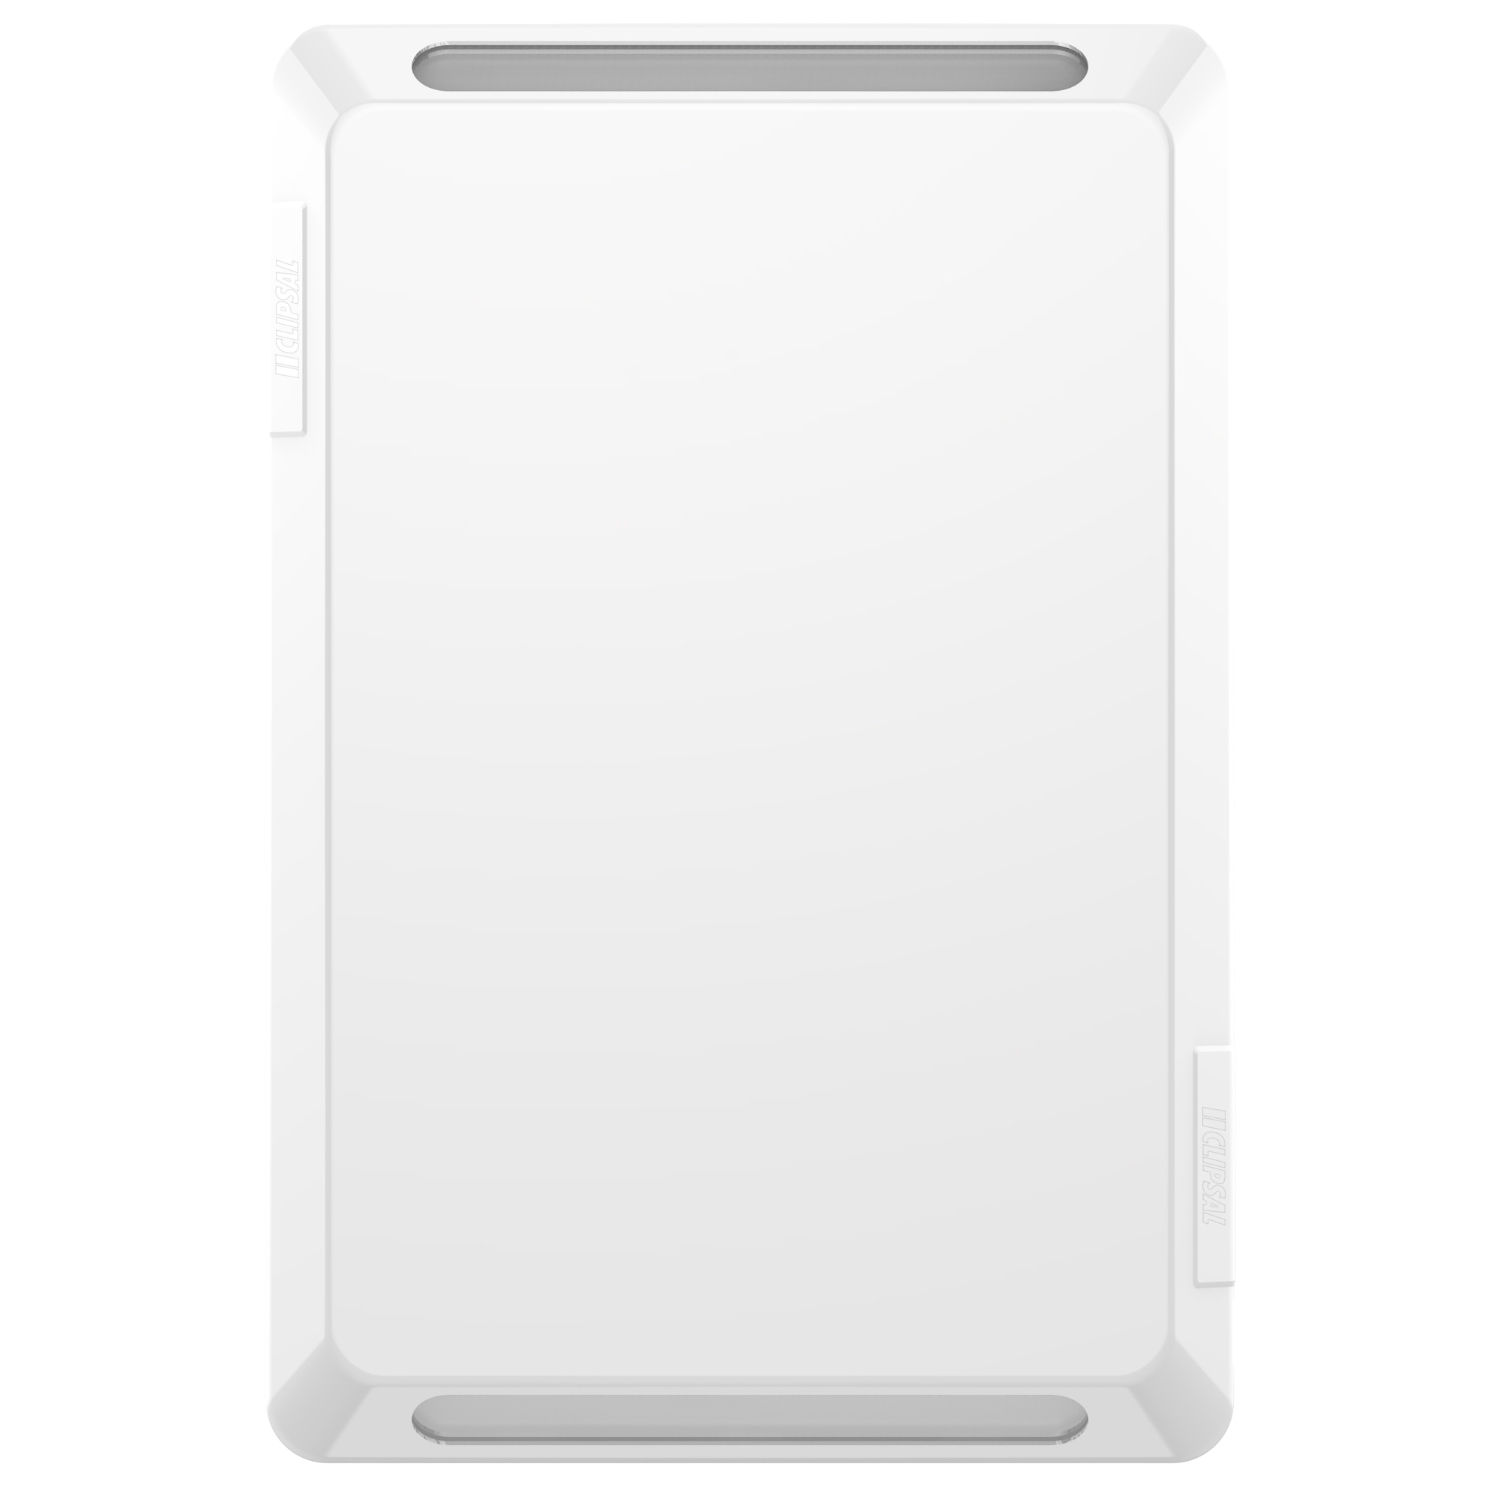 PDL Pro Series - Grid Blank Plate - White